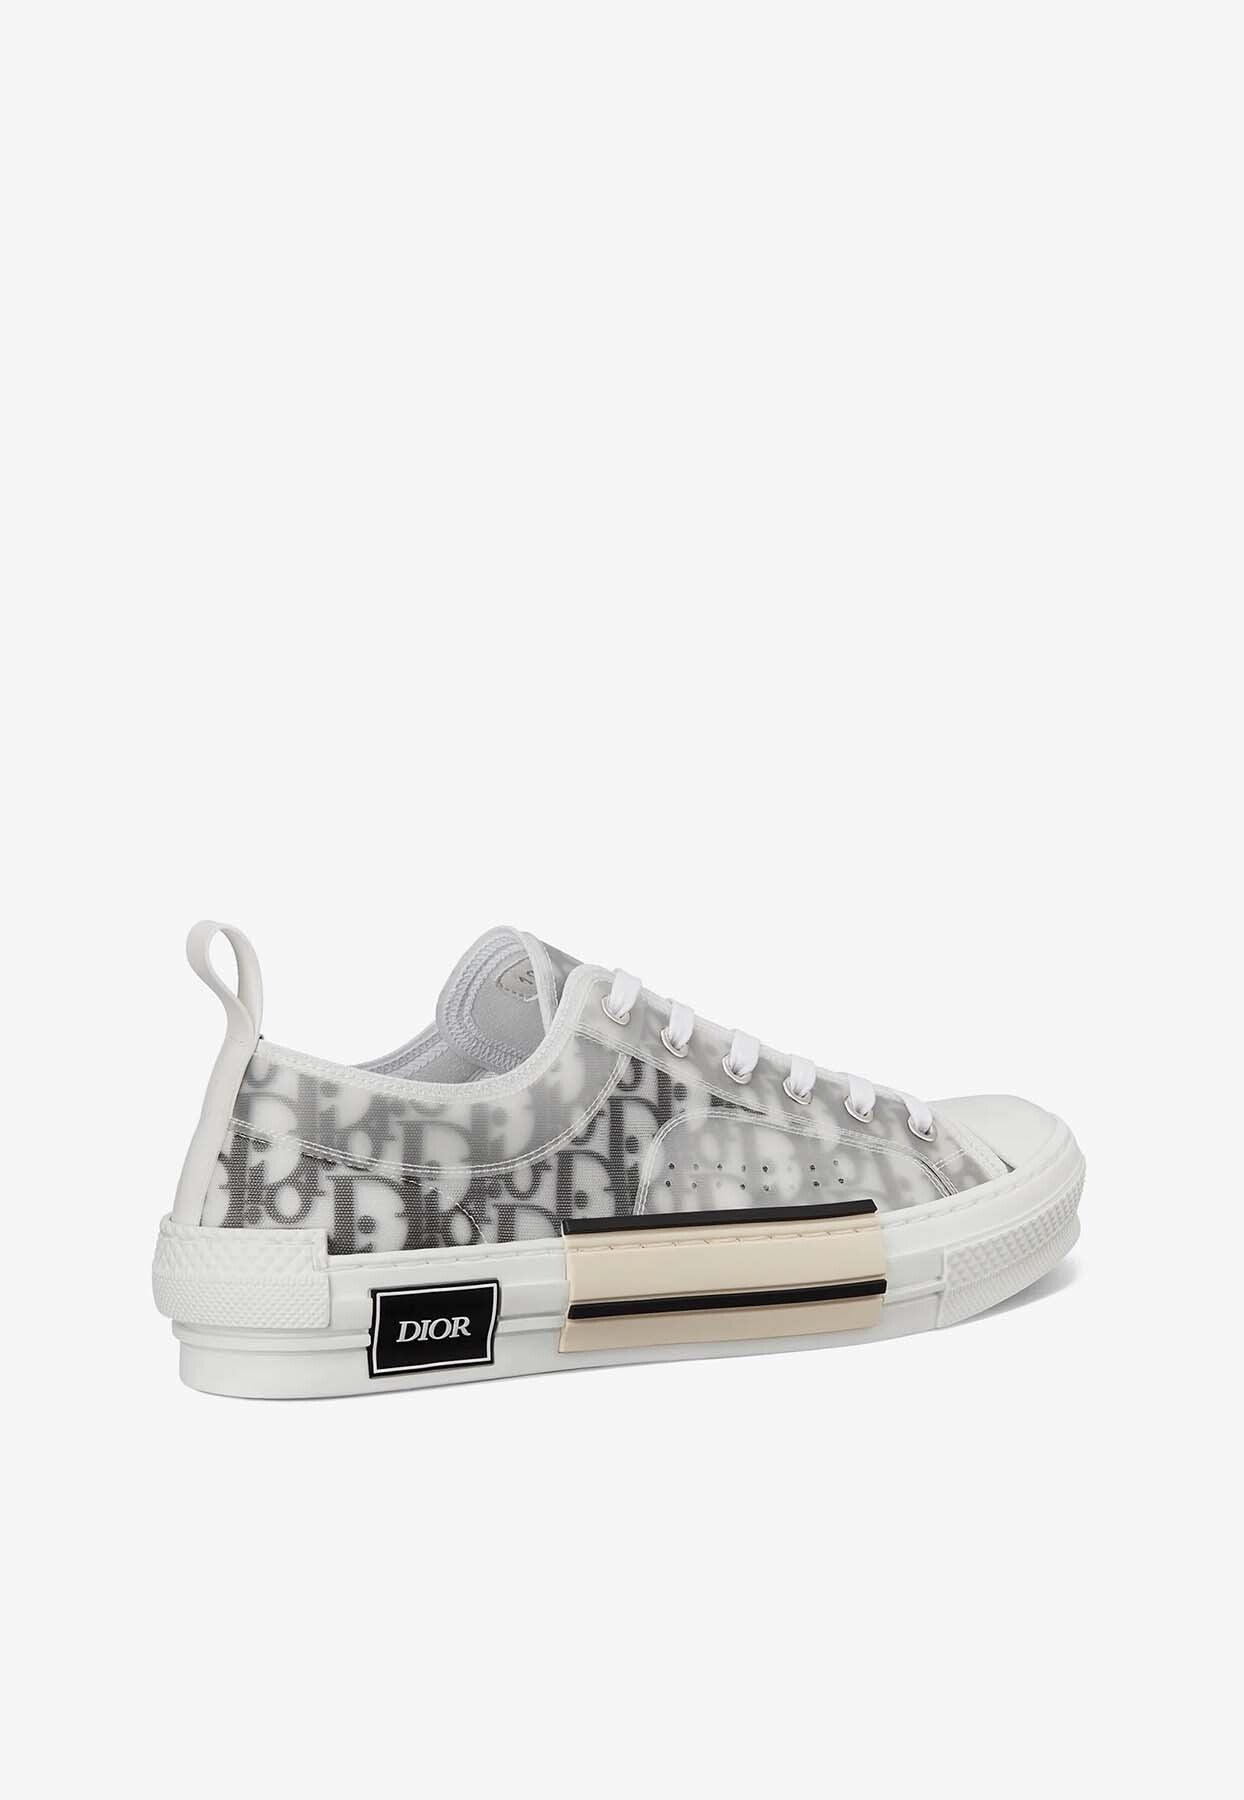 Dior B23 Low-top Sneakers In Oblique Canvas in White | Lyst Canada